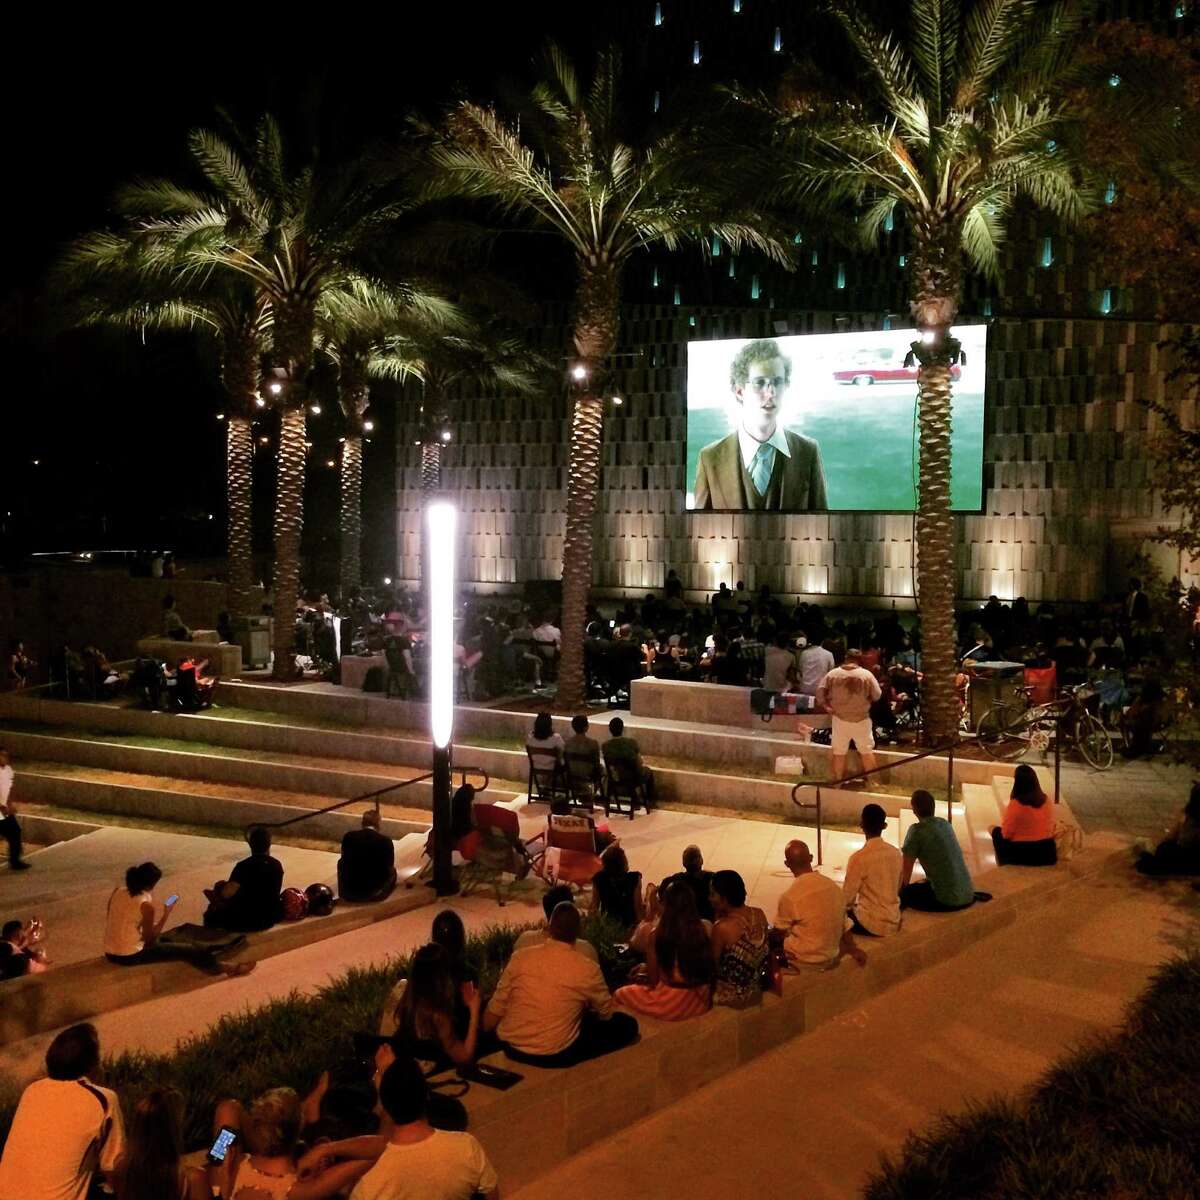 Among the free events at the Tobin Center for the Performing Arts is Cinema on the Plaza. “The arts play an important role in enhancing the quality of life in our city,” said Felix Padrón, director of the Department for Culture & Creative Development.